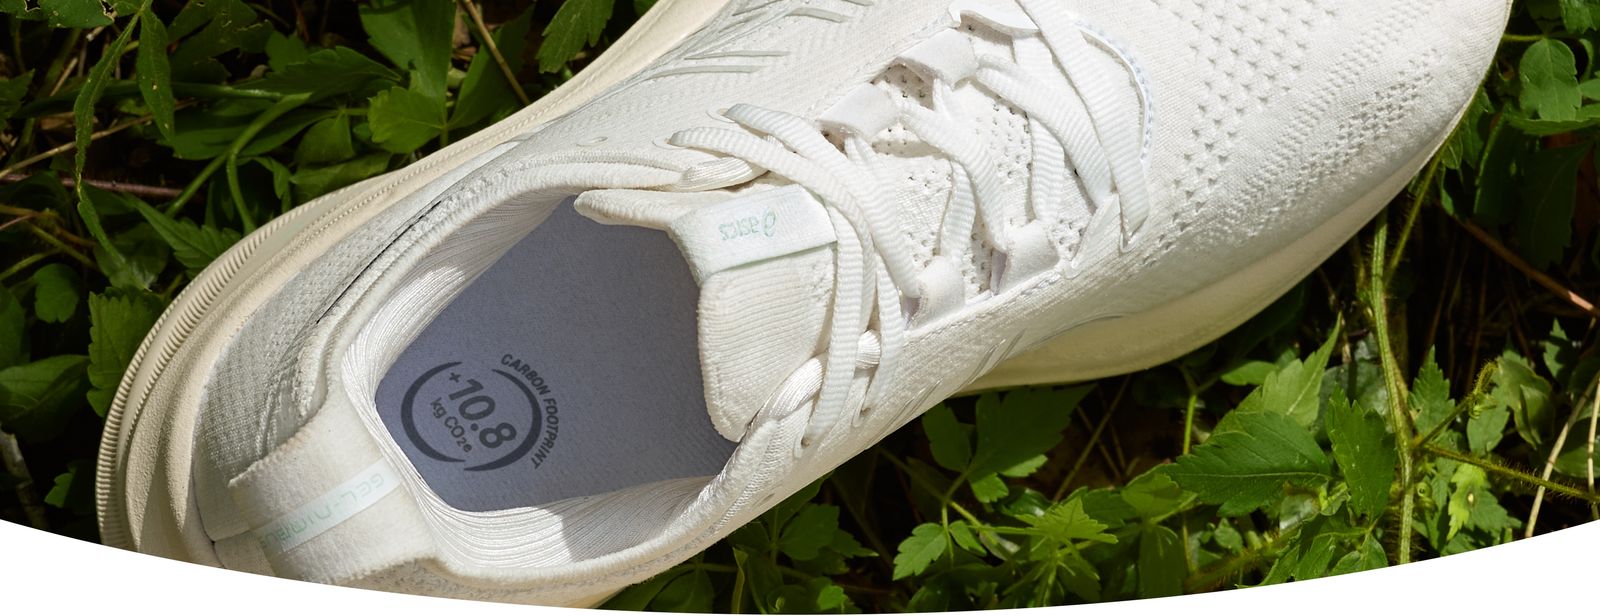 A close-up of the new Gel-Nimbus™ 26 and it's carbon footprint labeling